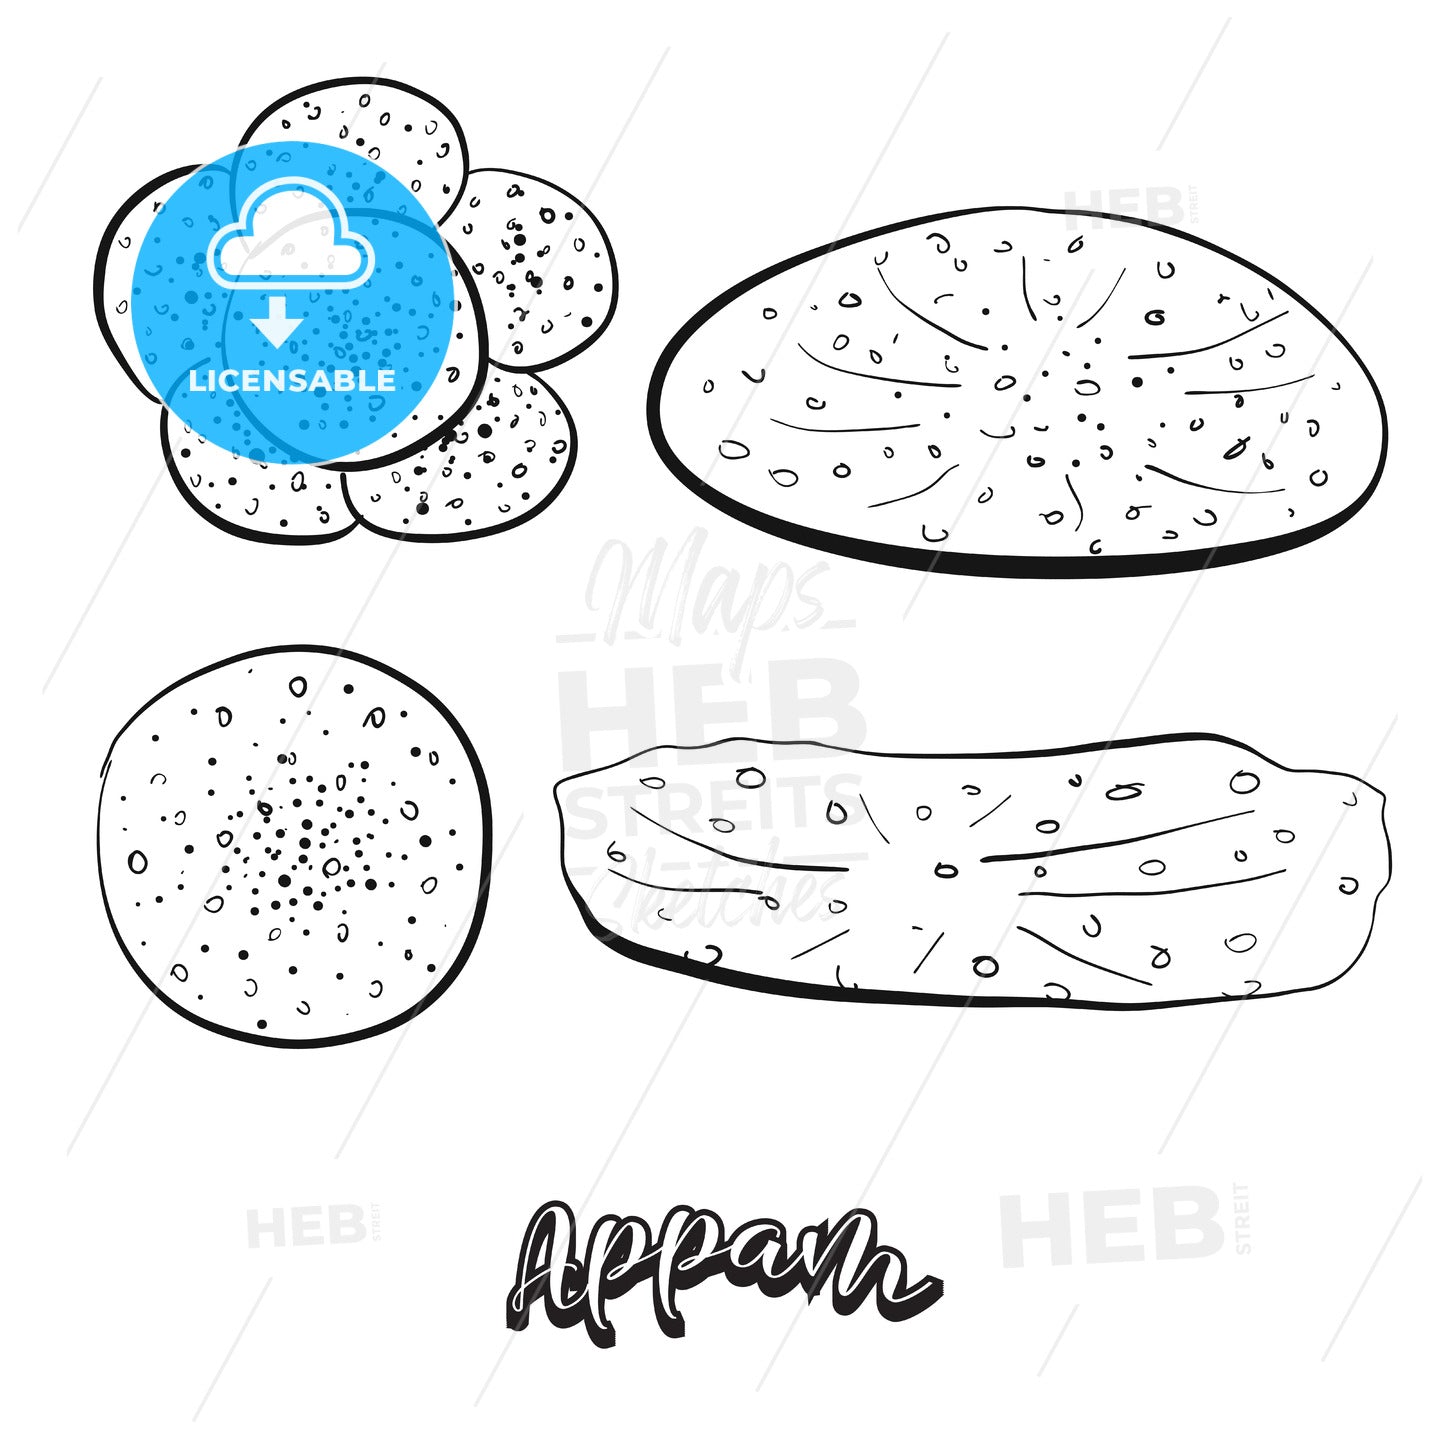 Hand drawn sketch of Appam food – instant download